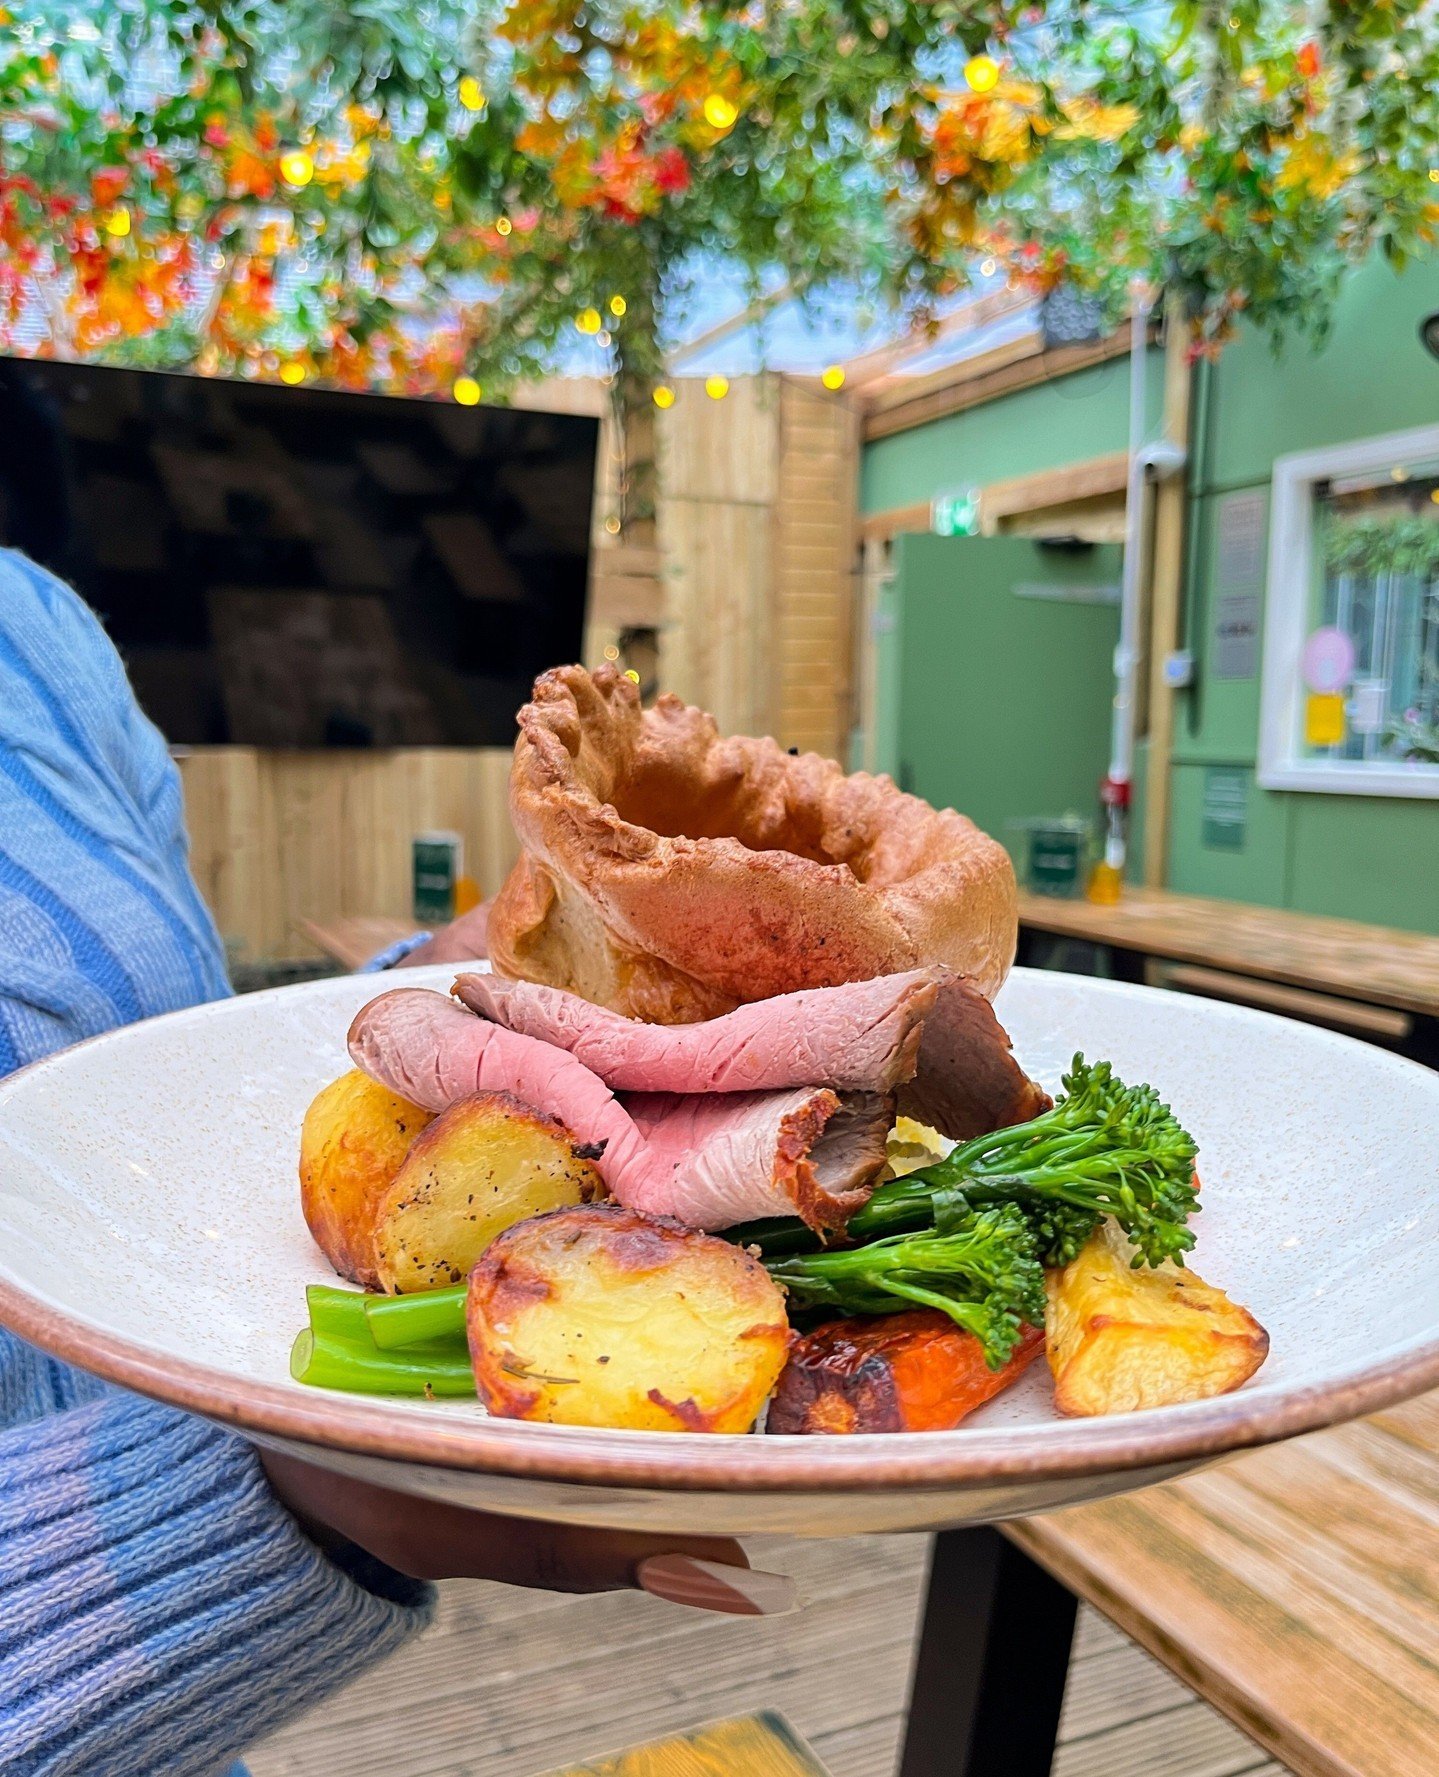 Anyone else recovering from their ABBA hangover? ⁠
⁠
Get down to the lawn club and attempt to recover with us (we think the roasties will do it 🤤).⁠
⁠
From 12pm join us for the ultimate roast, bottomless gravy &amp; choose from roast topside beef, p